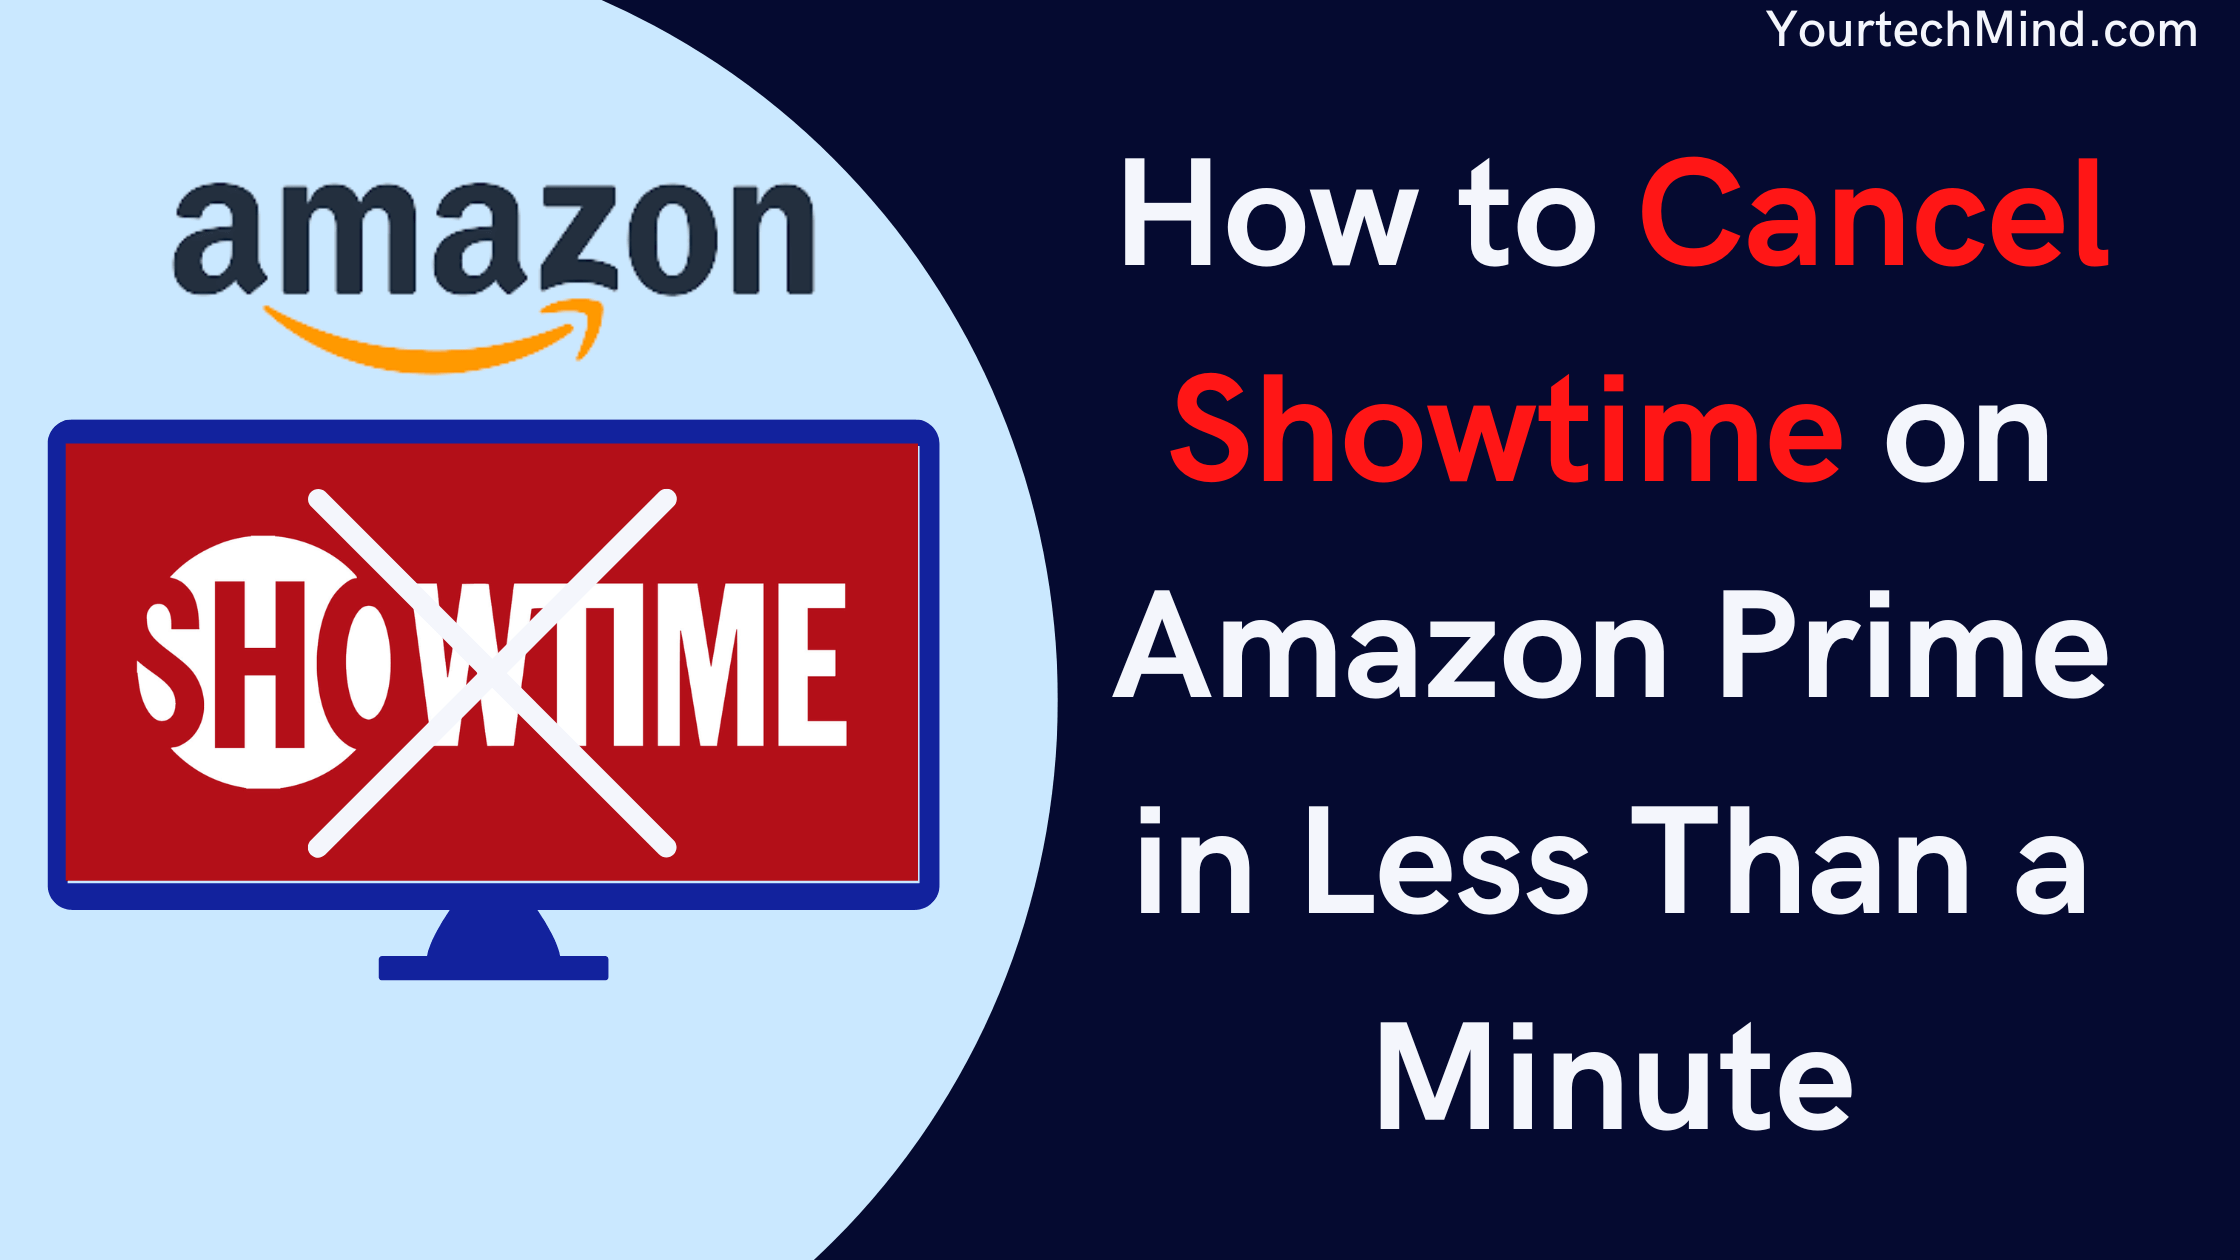 How to Cancel Showtime on Amazon prime